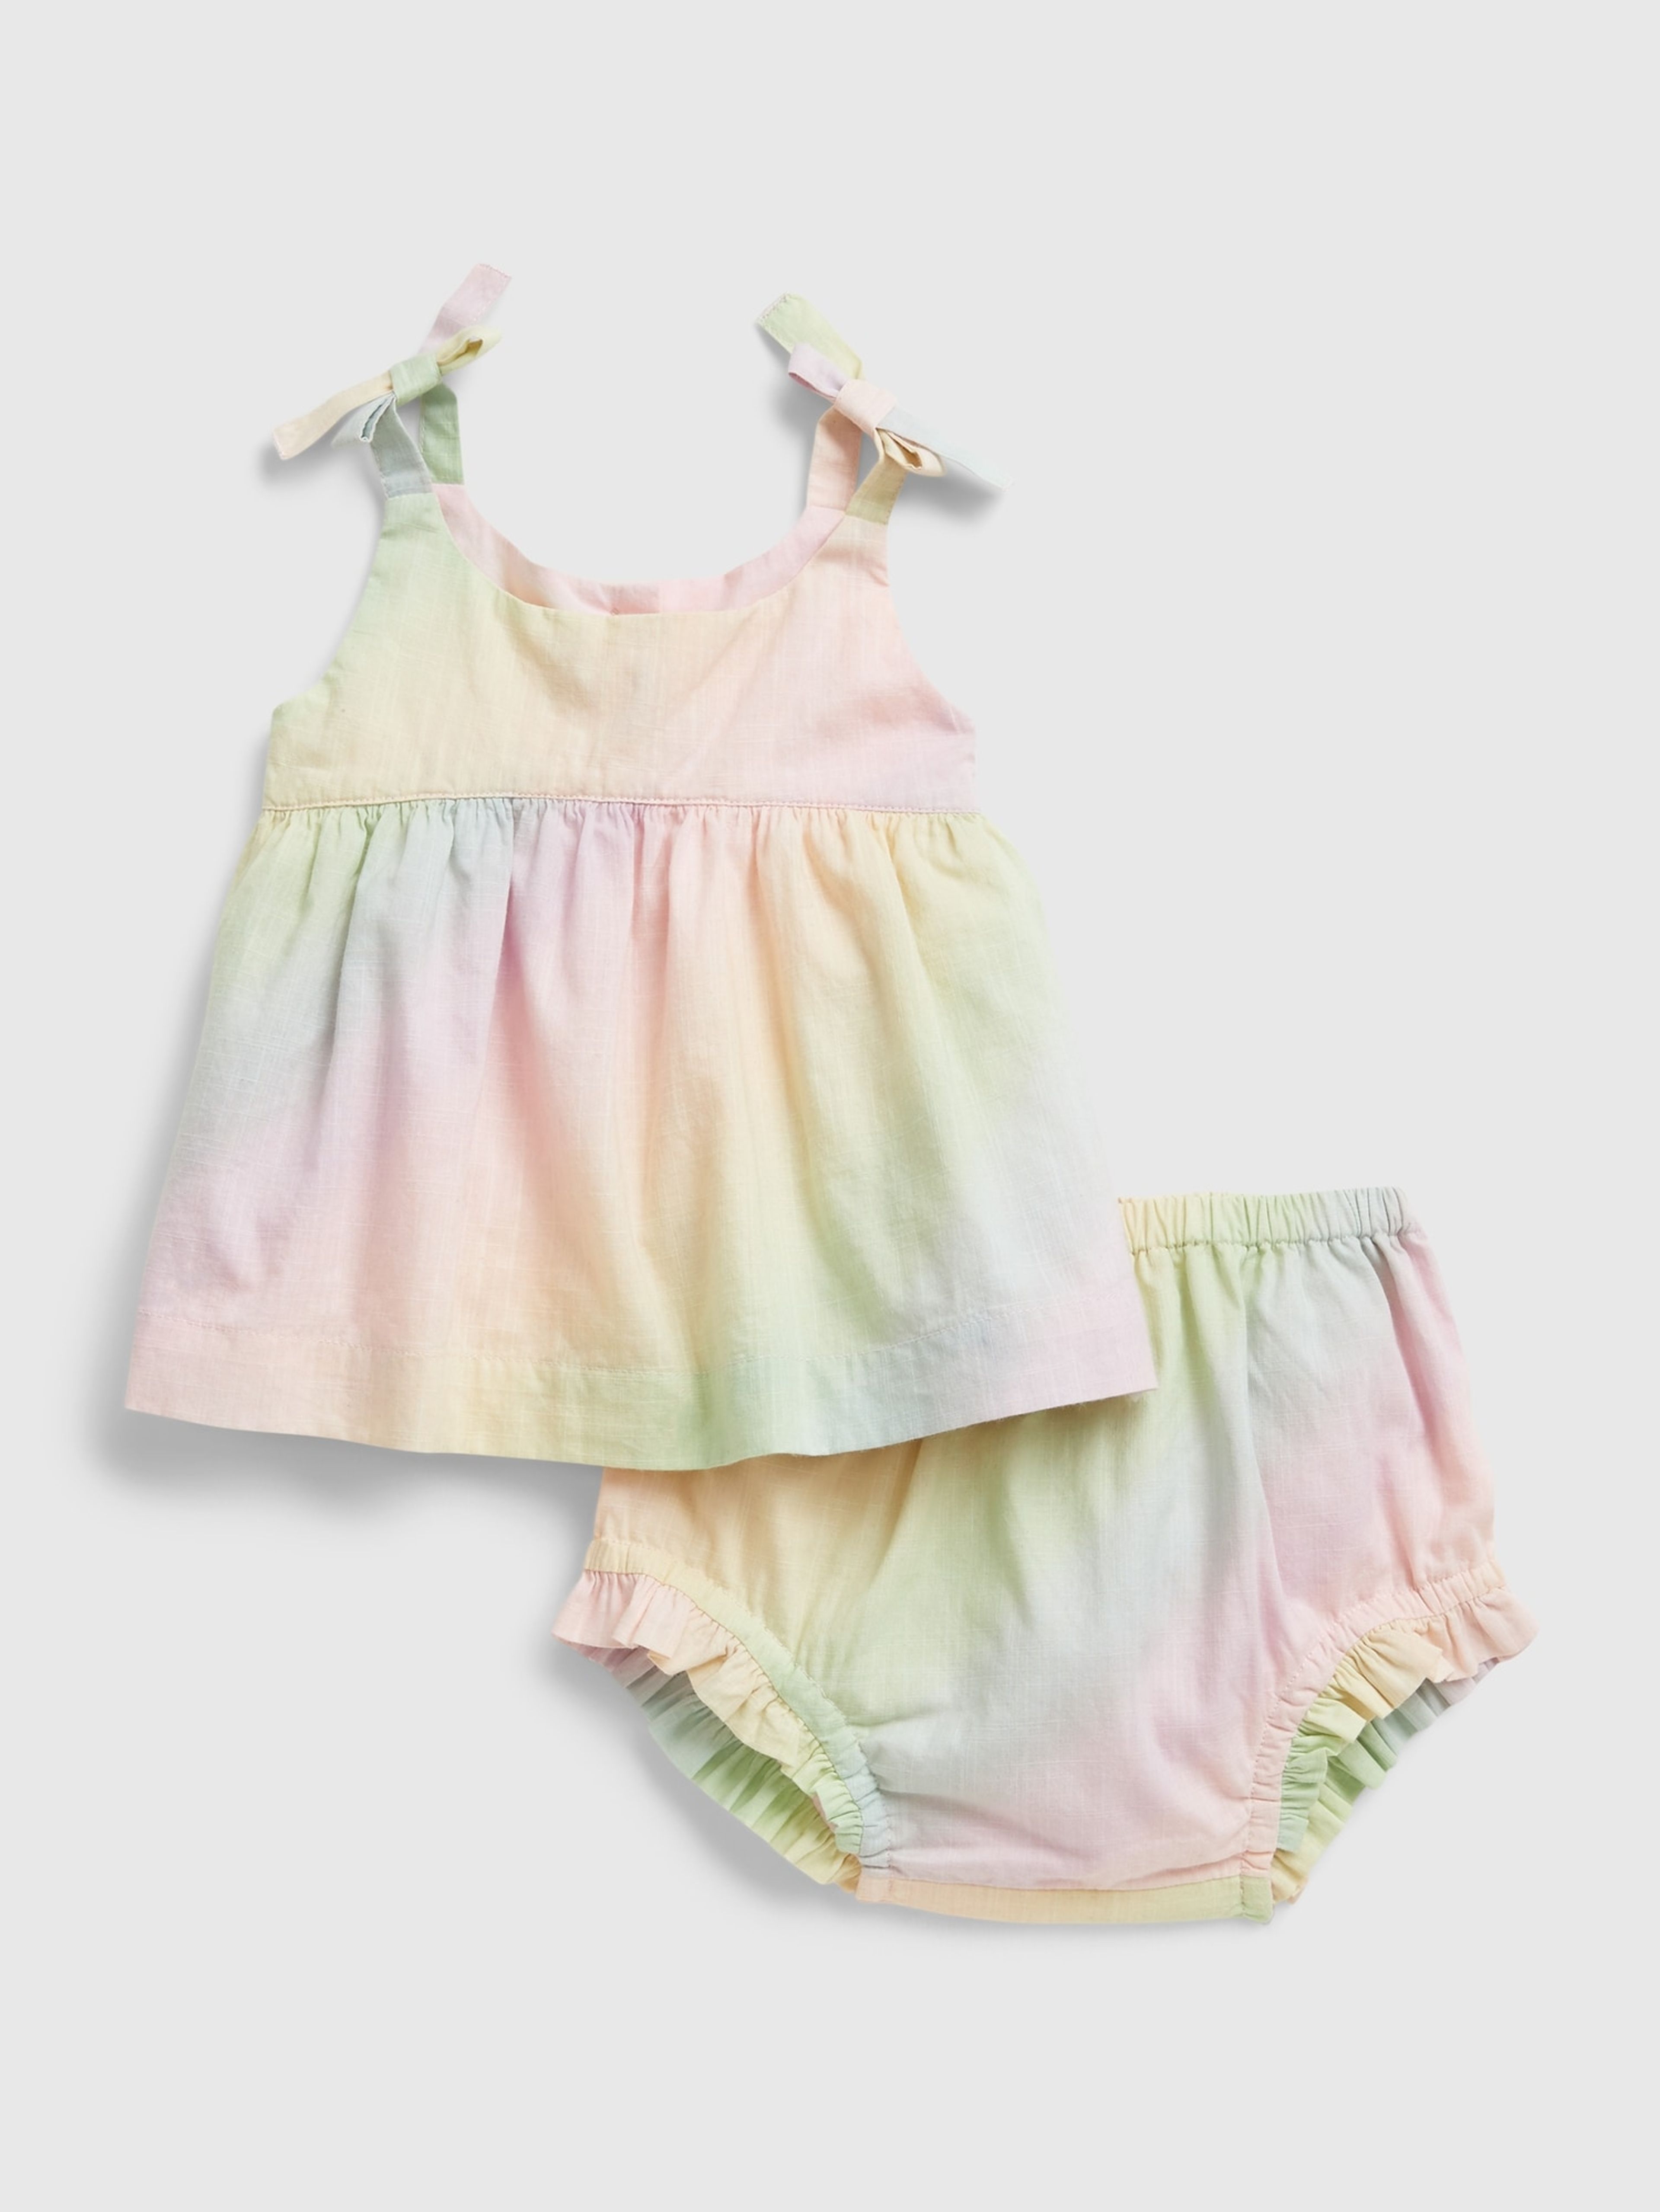 Baby set outfit